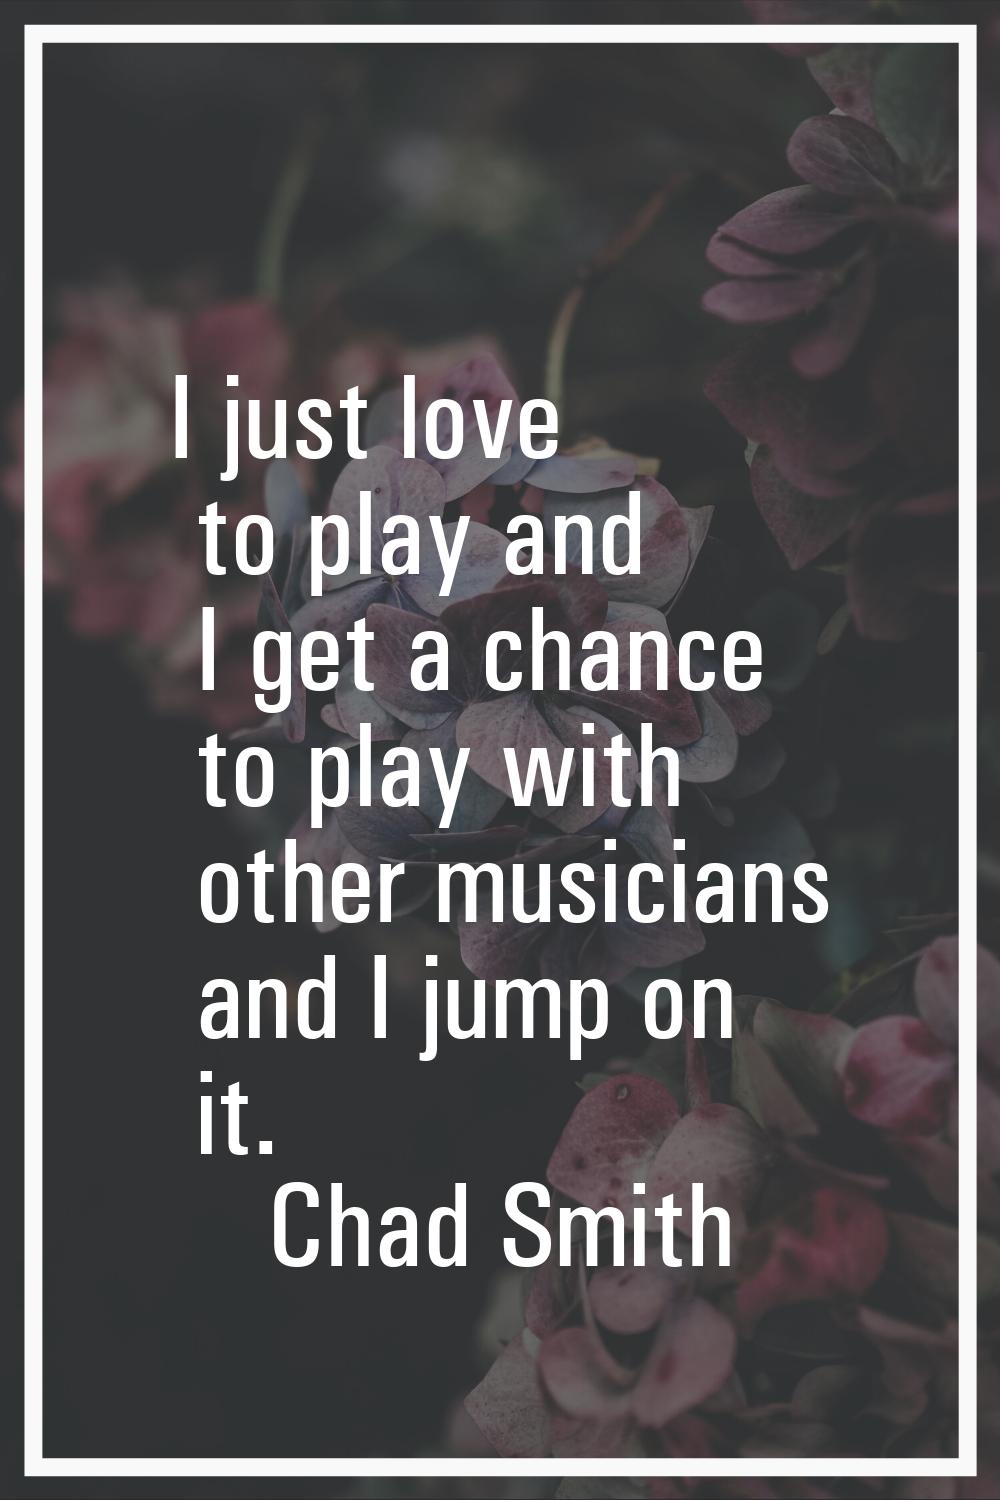 I just love to play and I get a chance to play with other musicians and I jump on it.